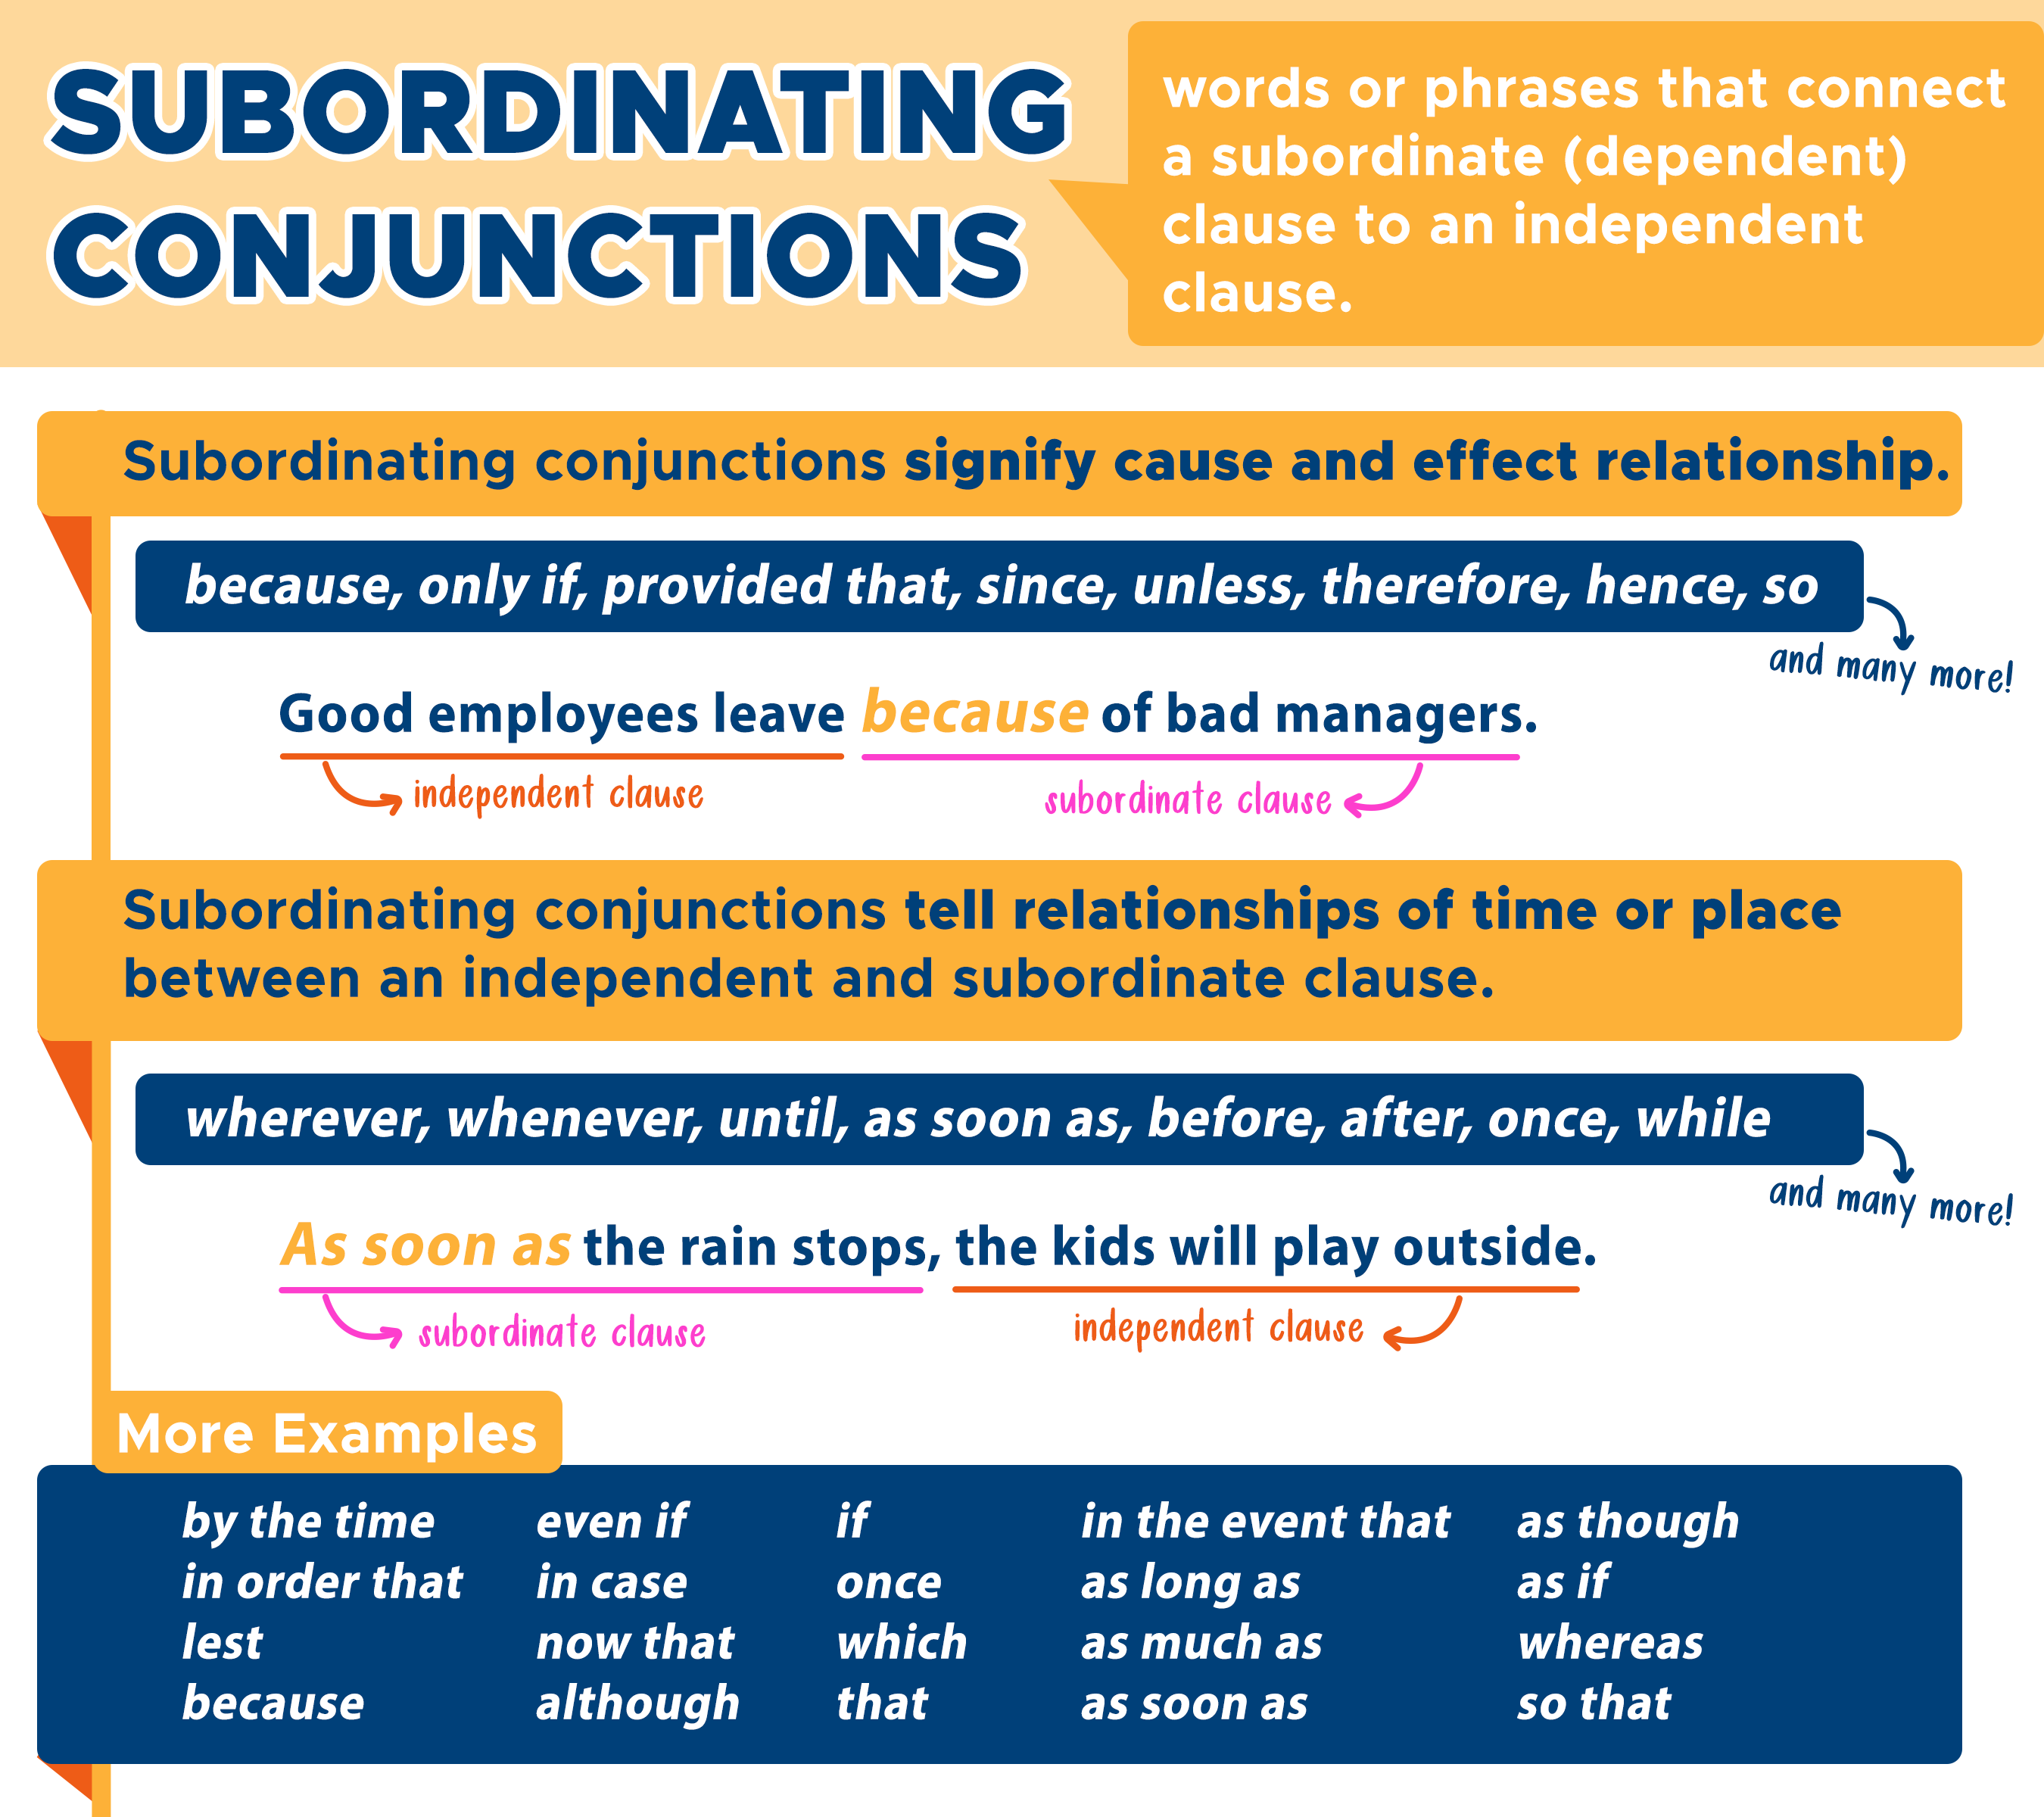 Coordinating Conjunction — Definition, Uses, and Examples